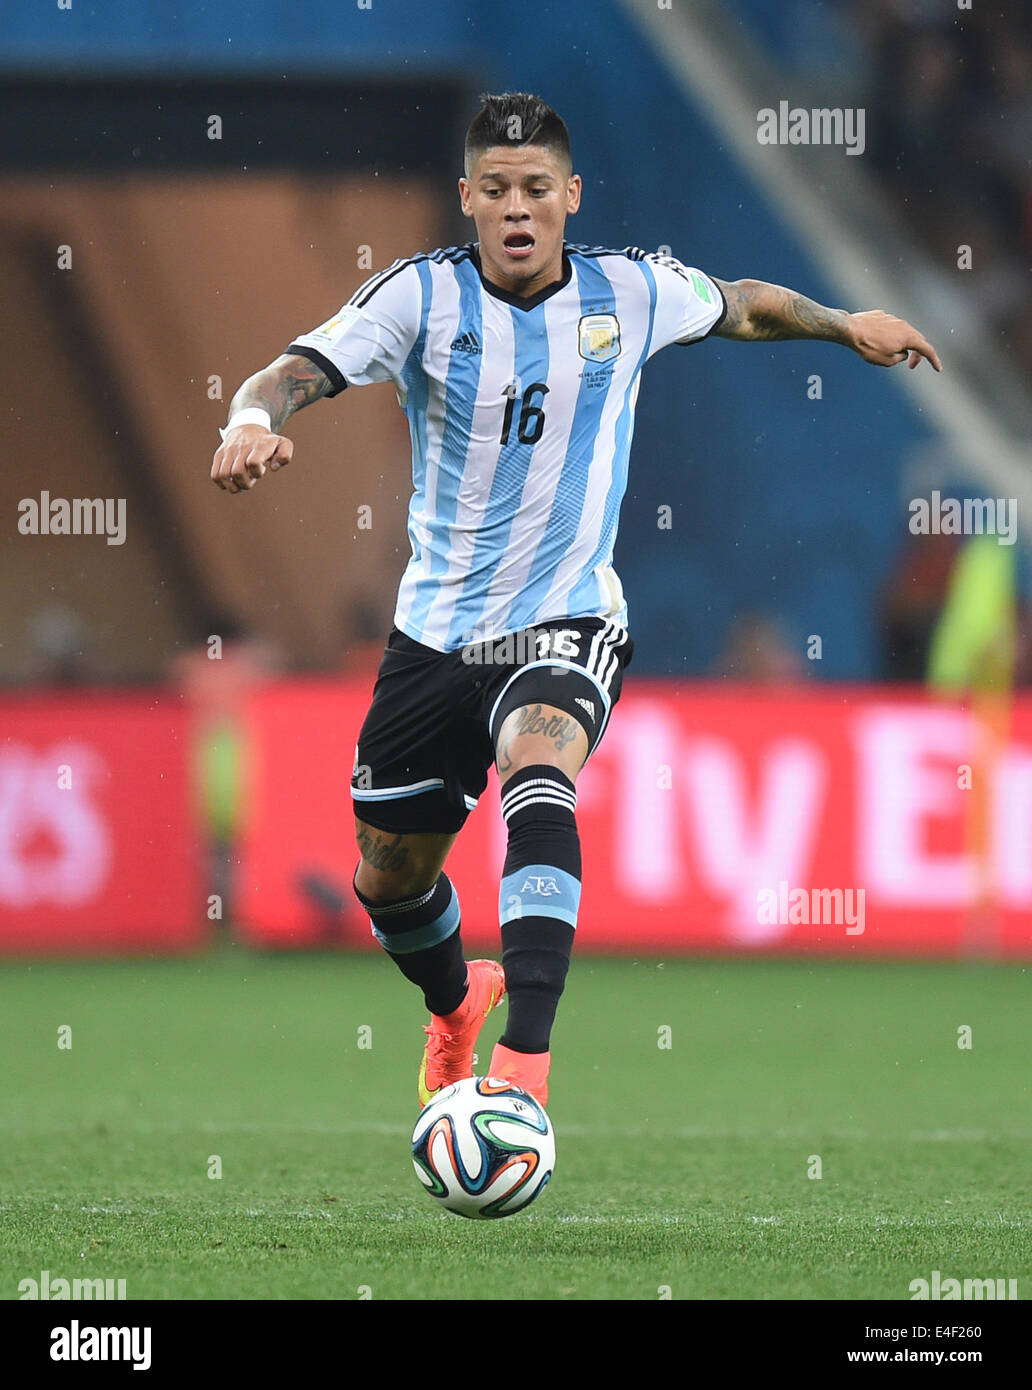 Sao Paulo, Brazil. 09th July, 2014. Marcos Rojo of Argentina in action during the FIFA World Cup 2014 semi-final soccer match between the Netherlands and Argentina at the Arena Corinthians in Sao Paulo, Brazil, 09 July 2014. Photo: Marius Becker/dpa/Alamy Live News Stock Photo